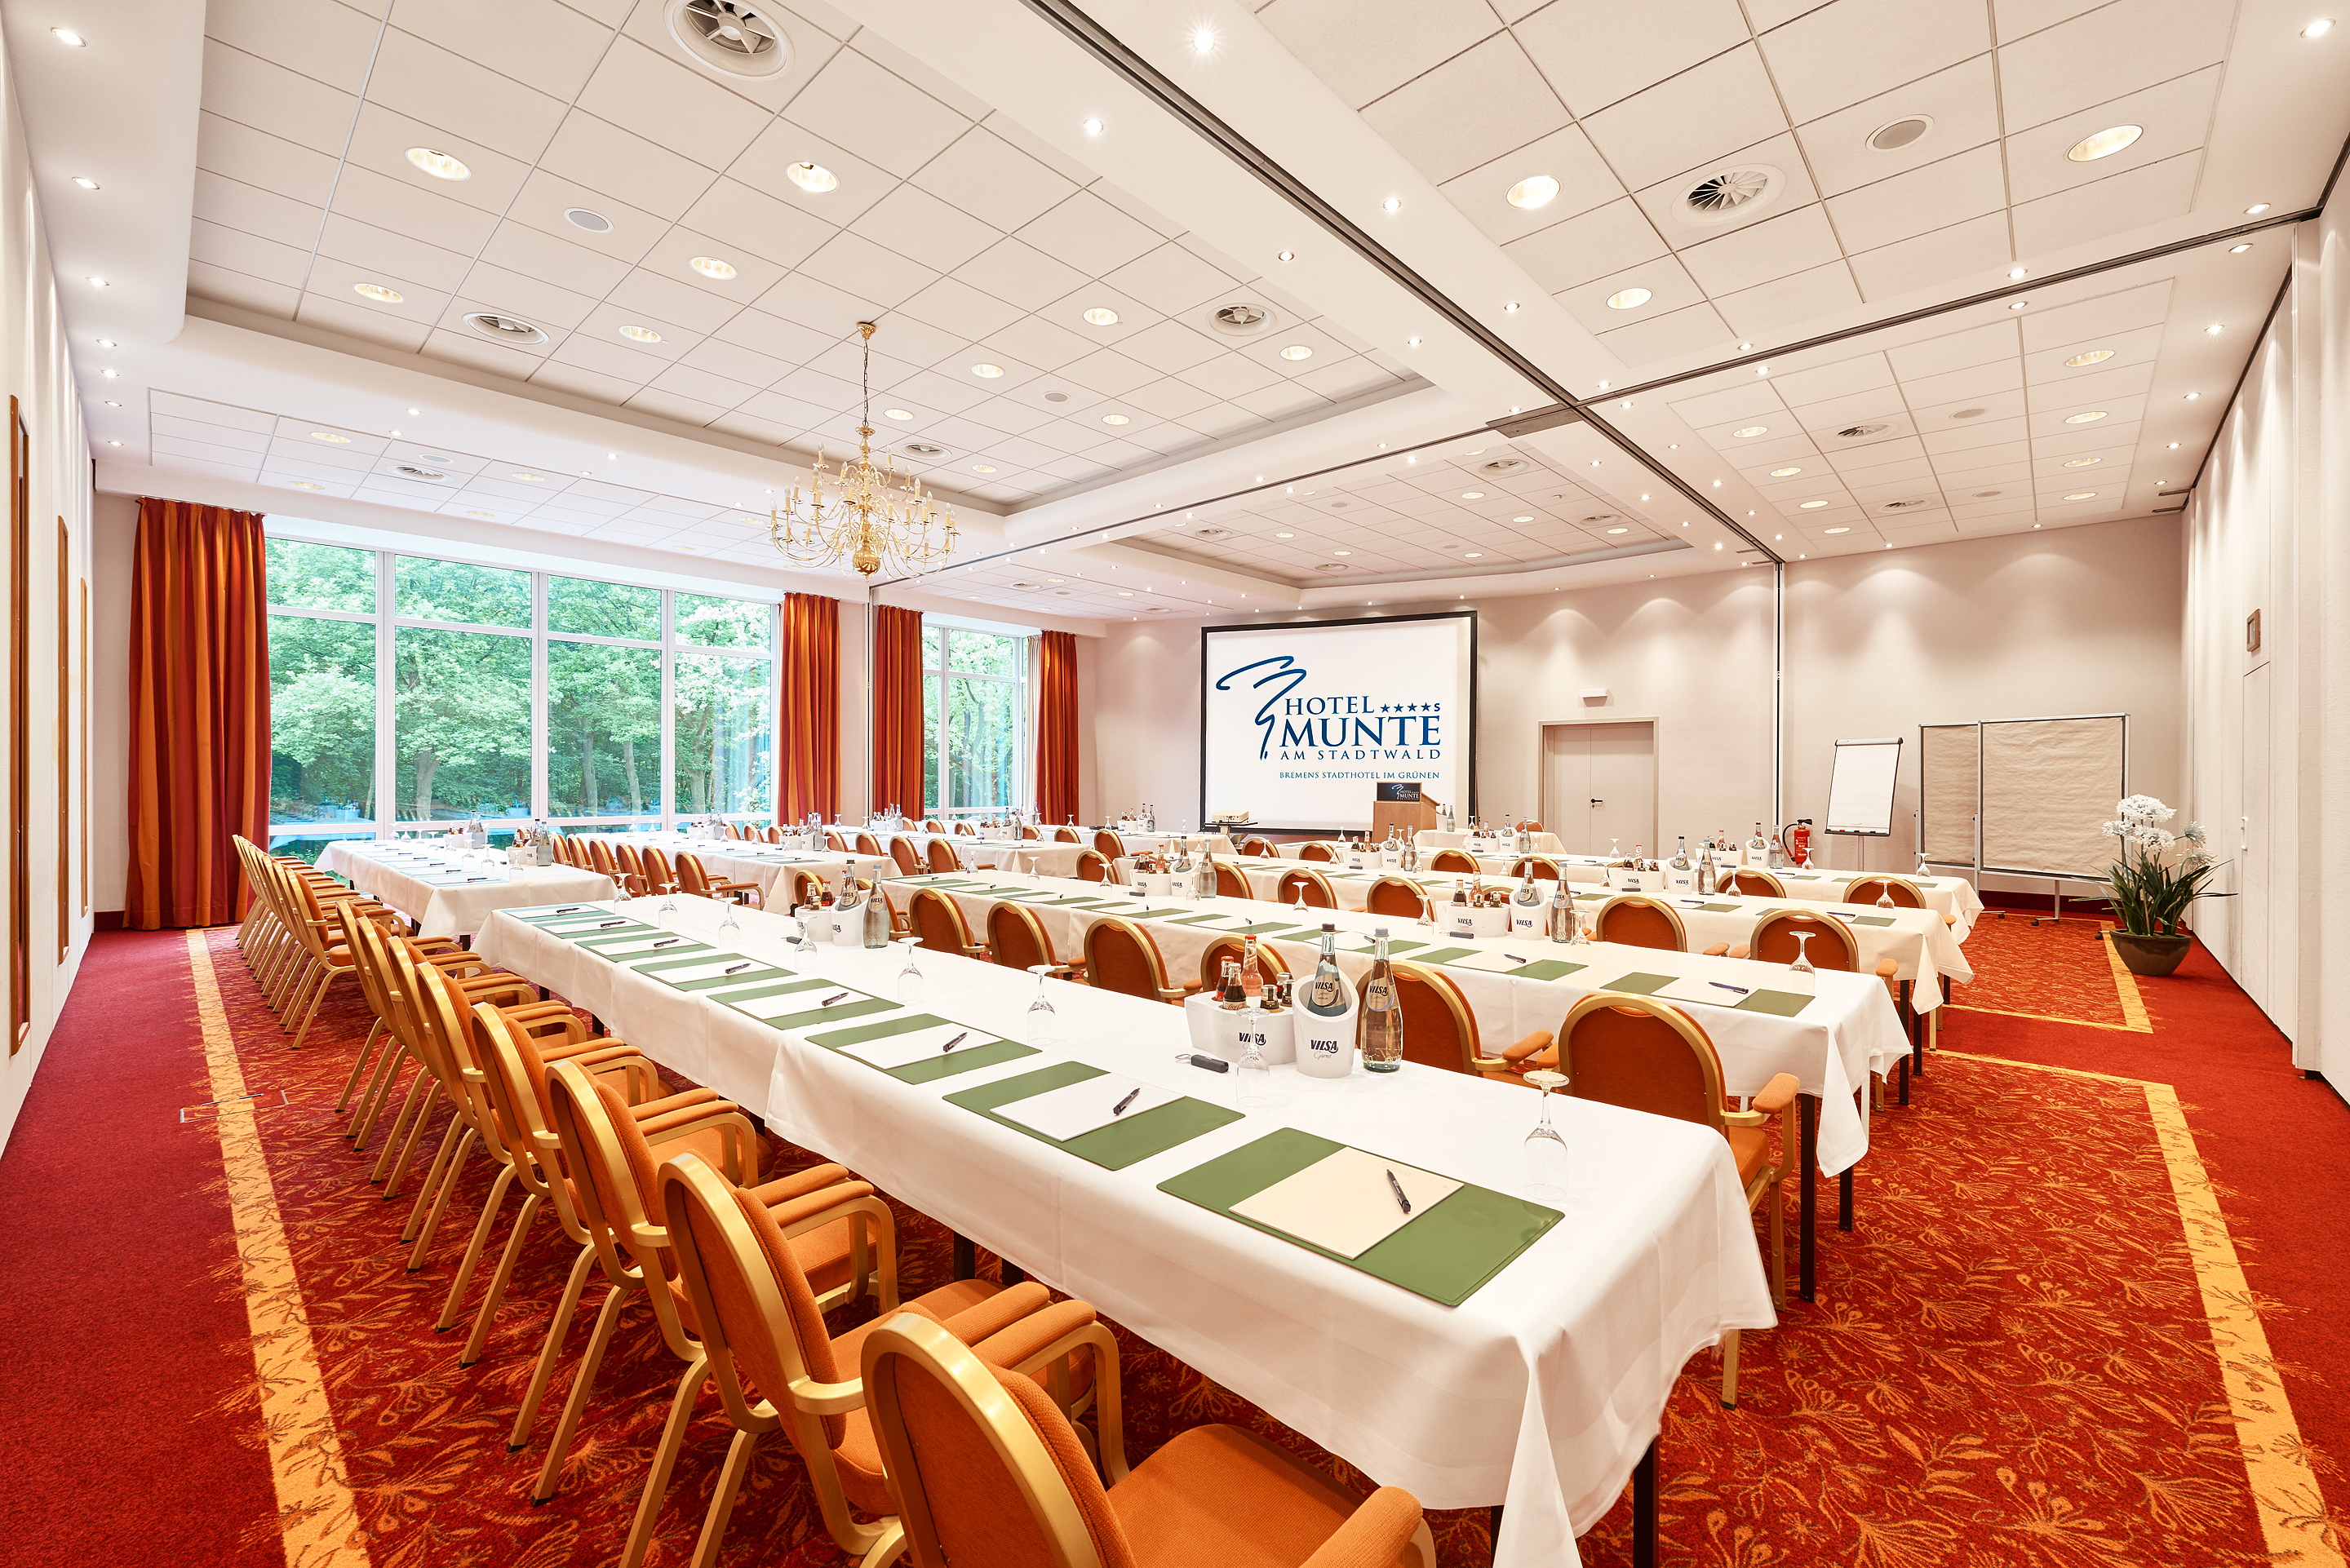 Conference room in Hotel Munte am Stadtwald Bremen